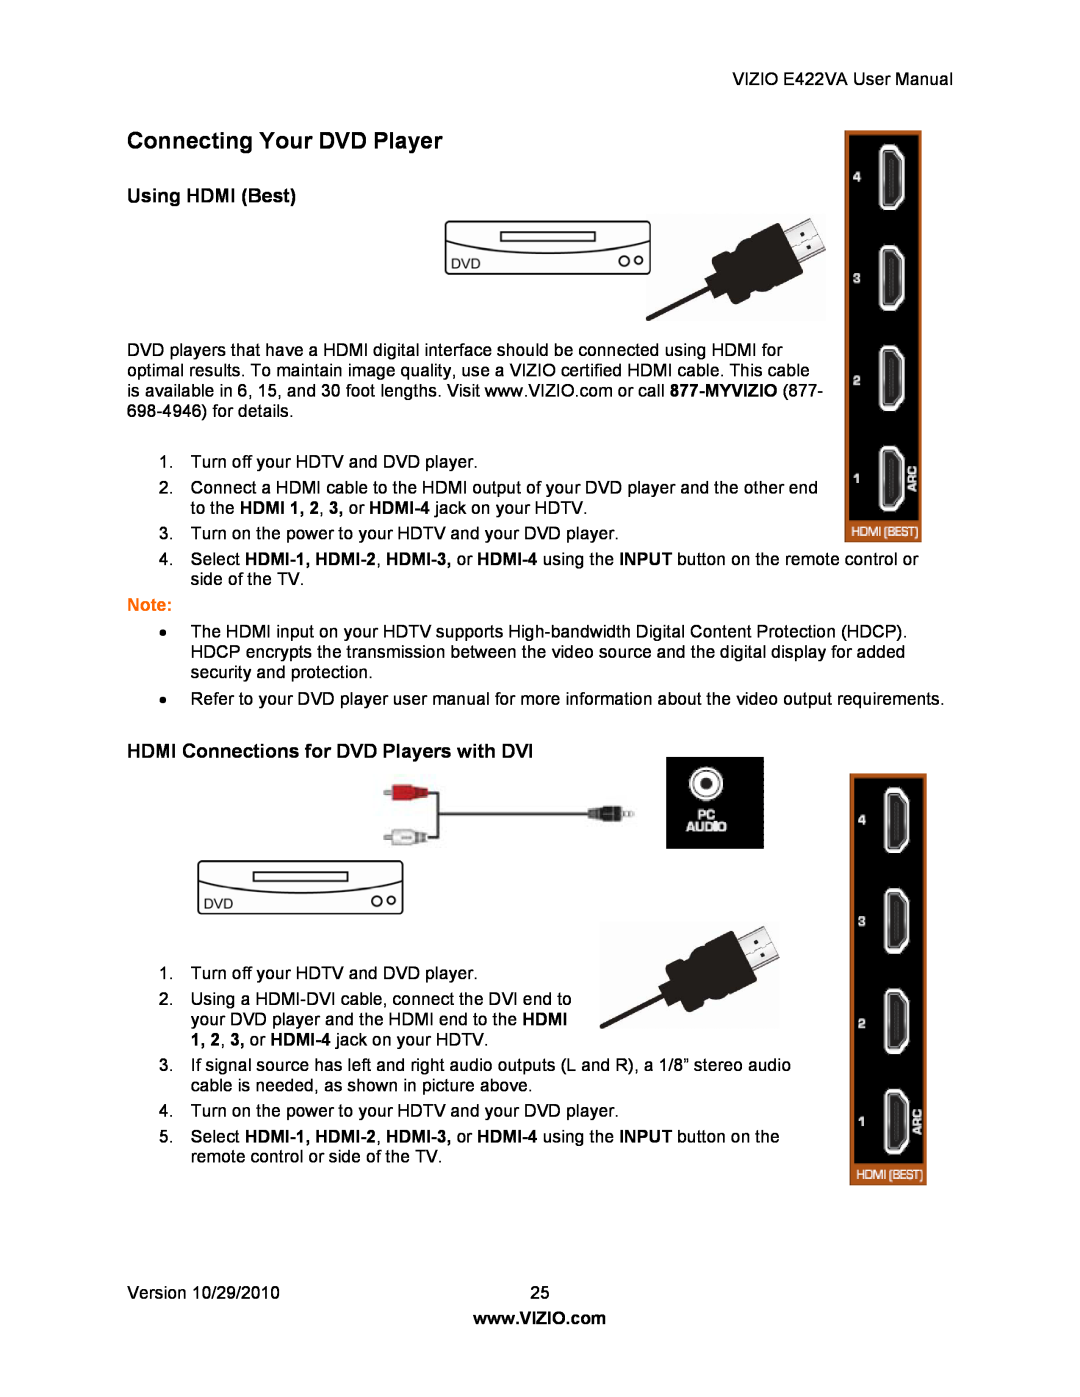 Xerox E422VA user manual Connecting Your DVD Player, HDMI Connections for DVD Players with DVI, Using HDMI Best 